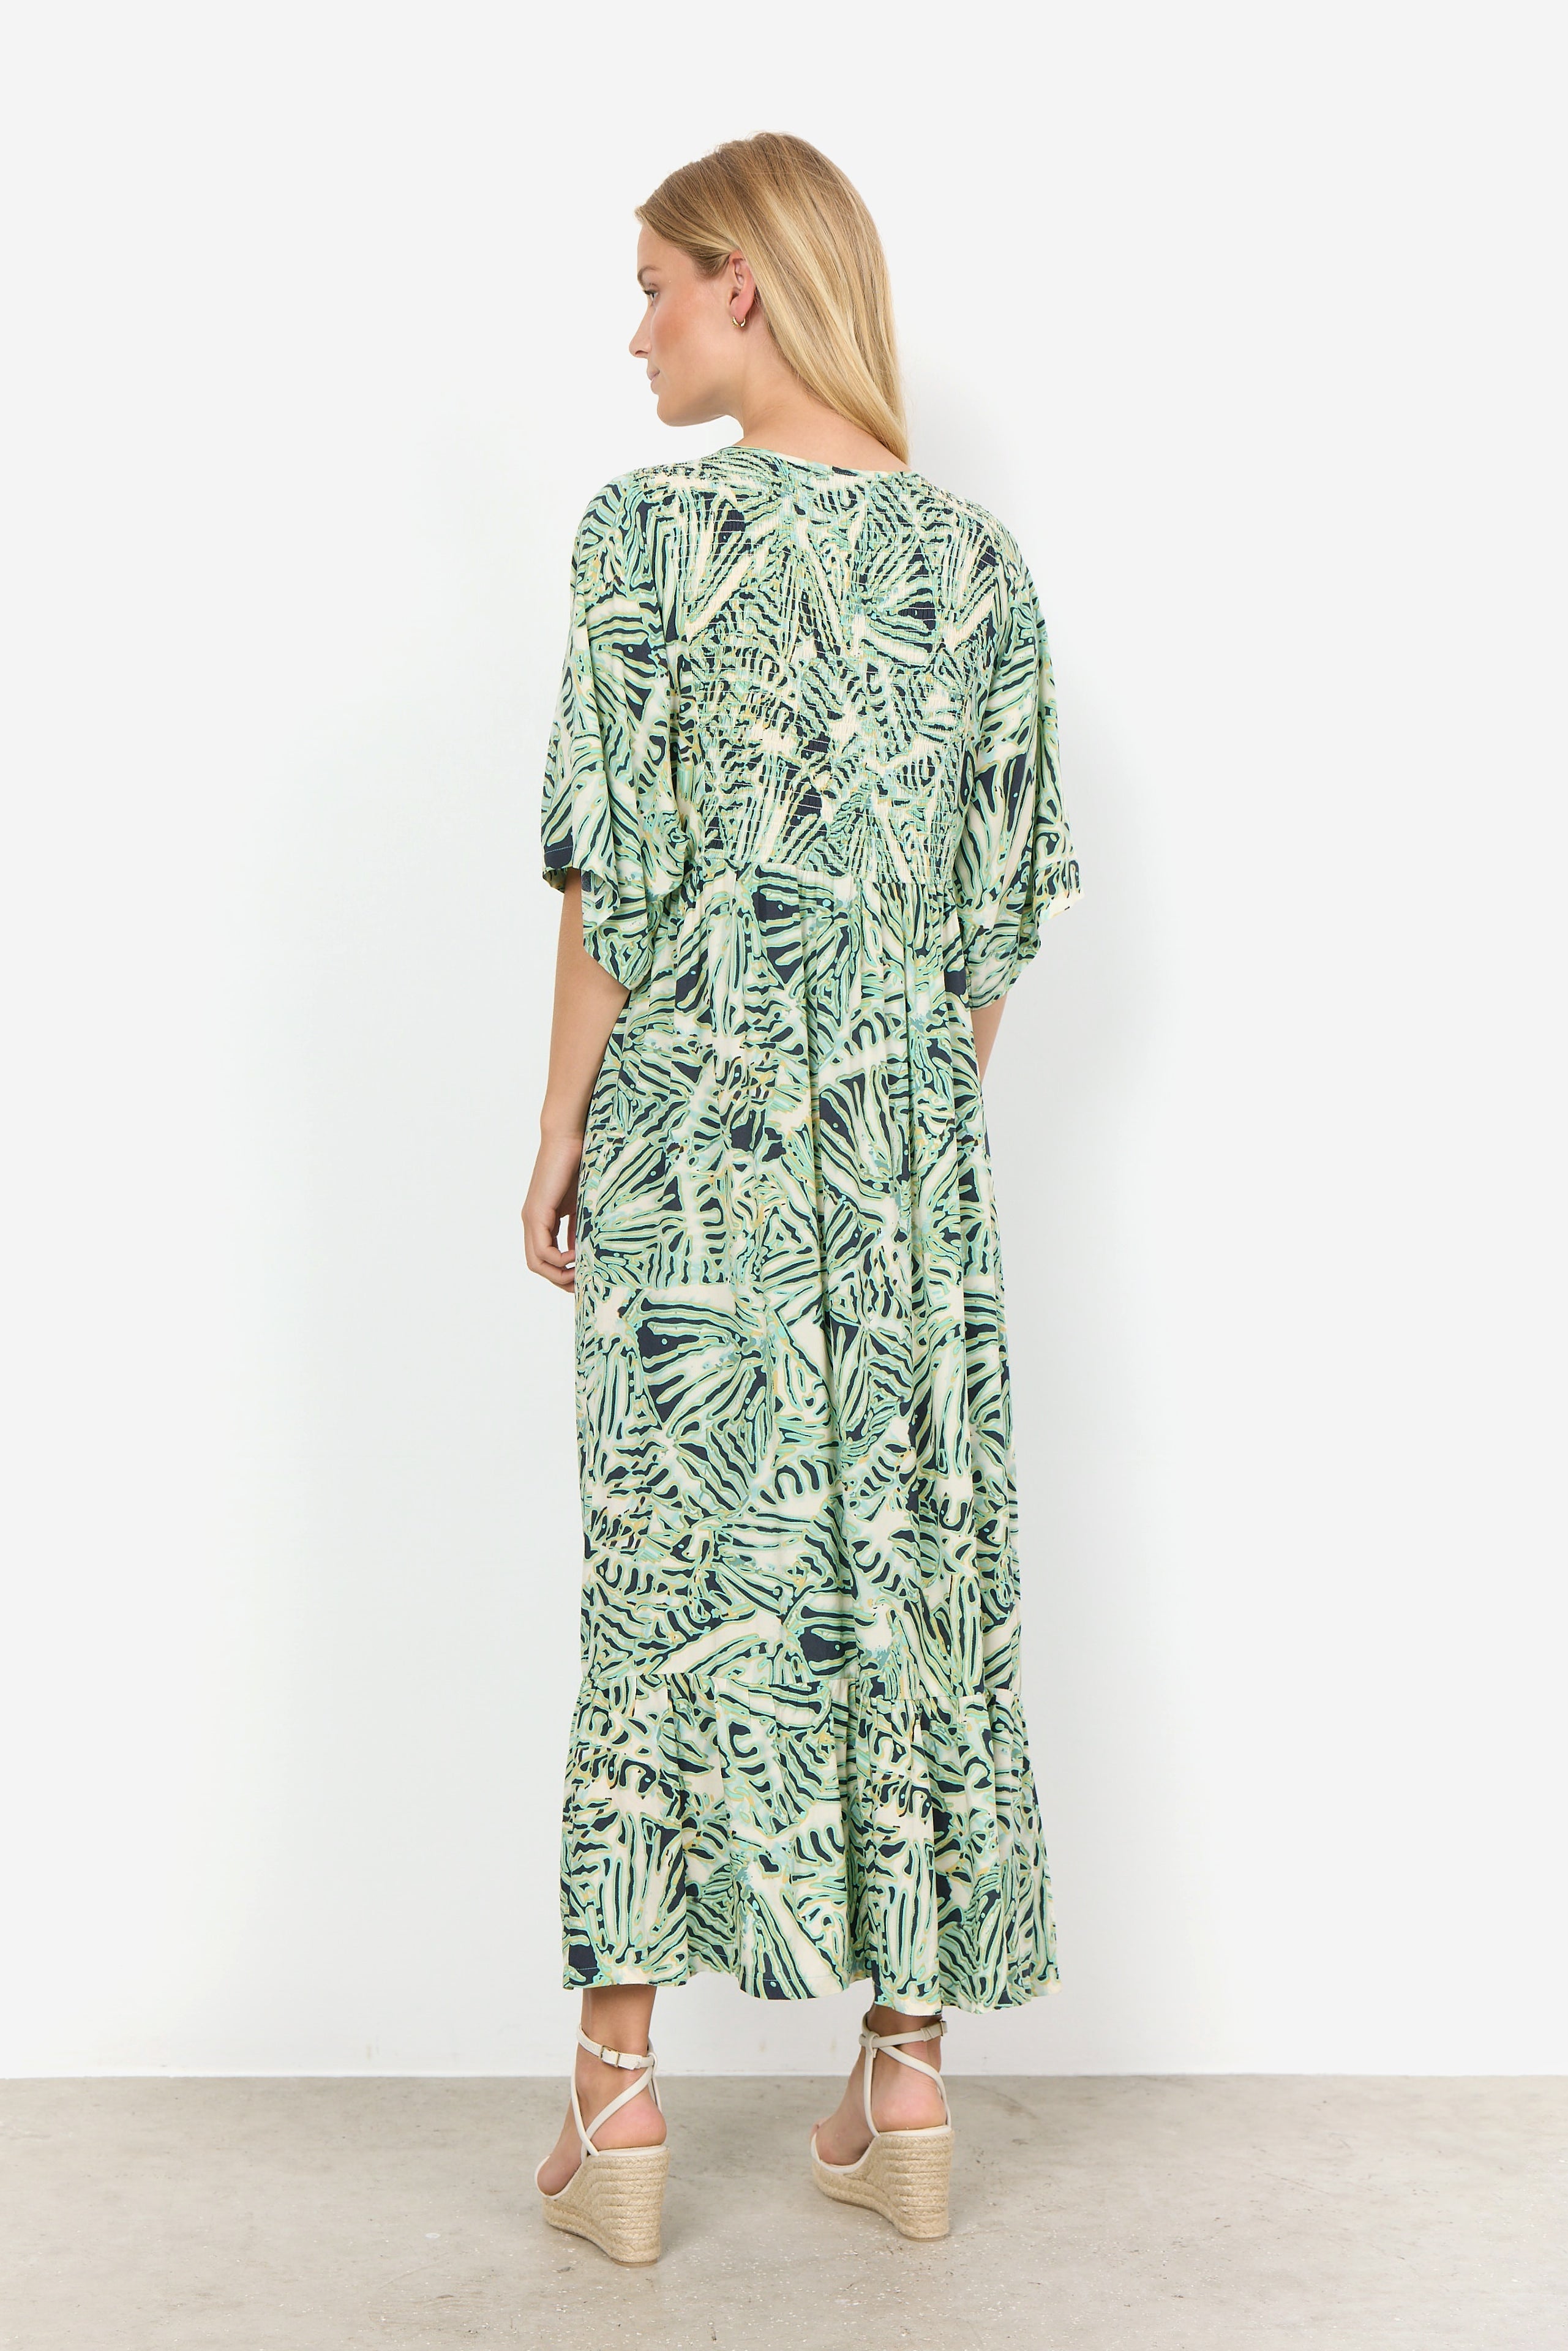 Back view of Soya Concept (40629) Women's Short Sleeve Aqua Foliage Printed Maxi Dress with V-neck and smocked bodice